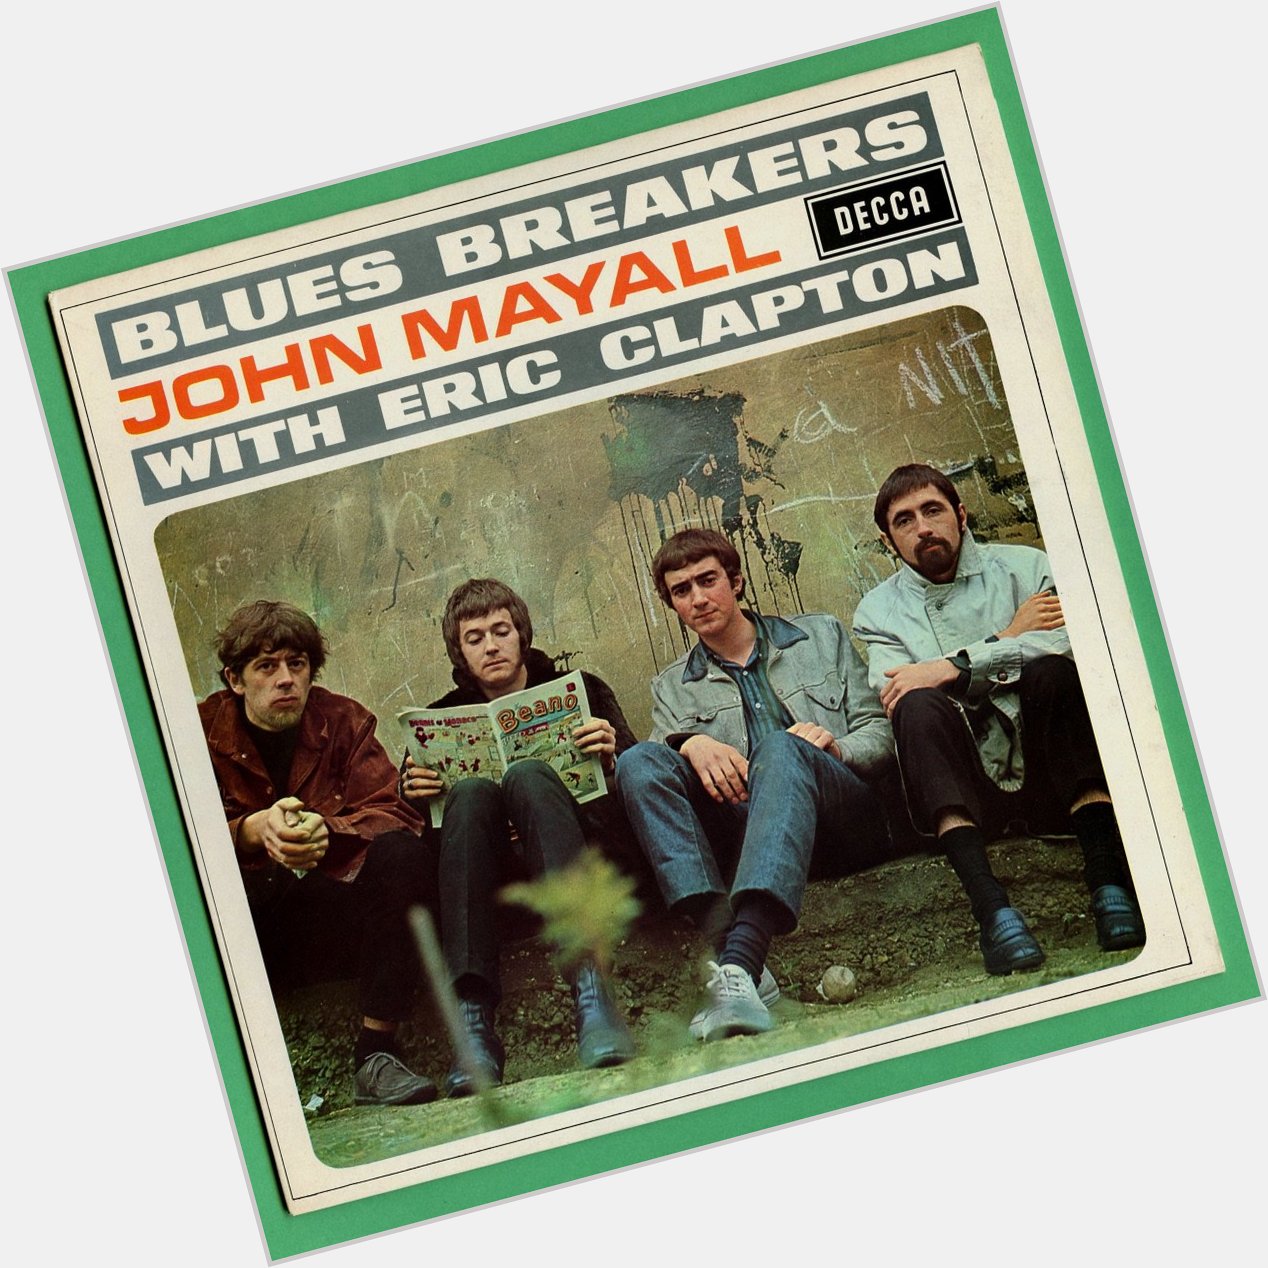 Happy Birthday John Mayall!  This record started some things.  